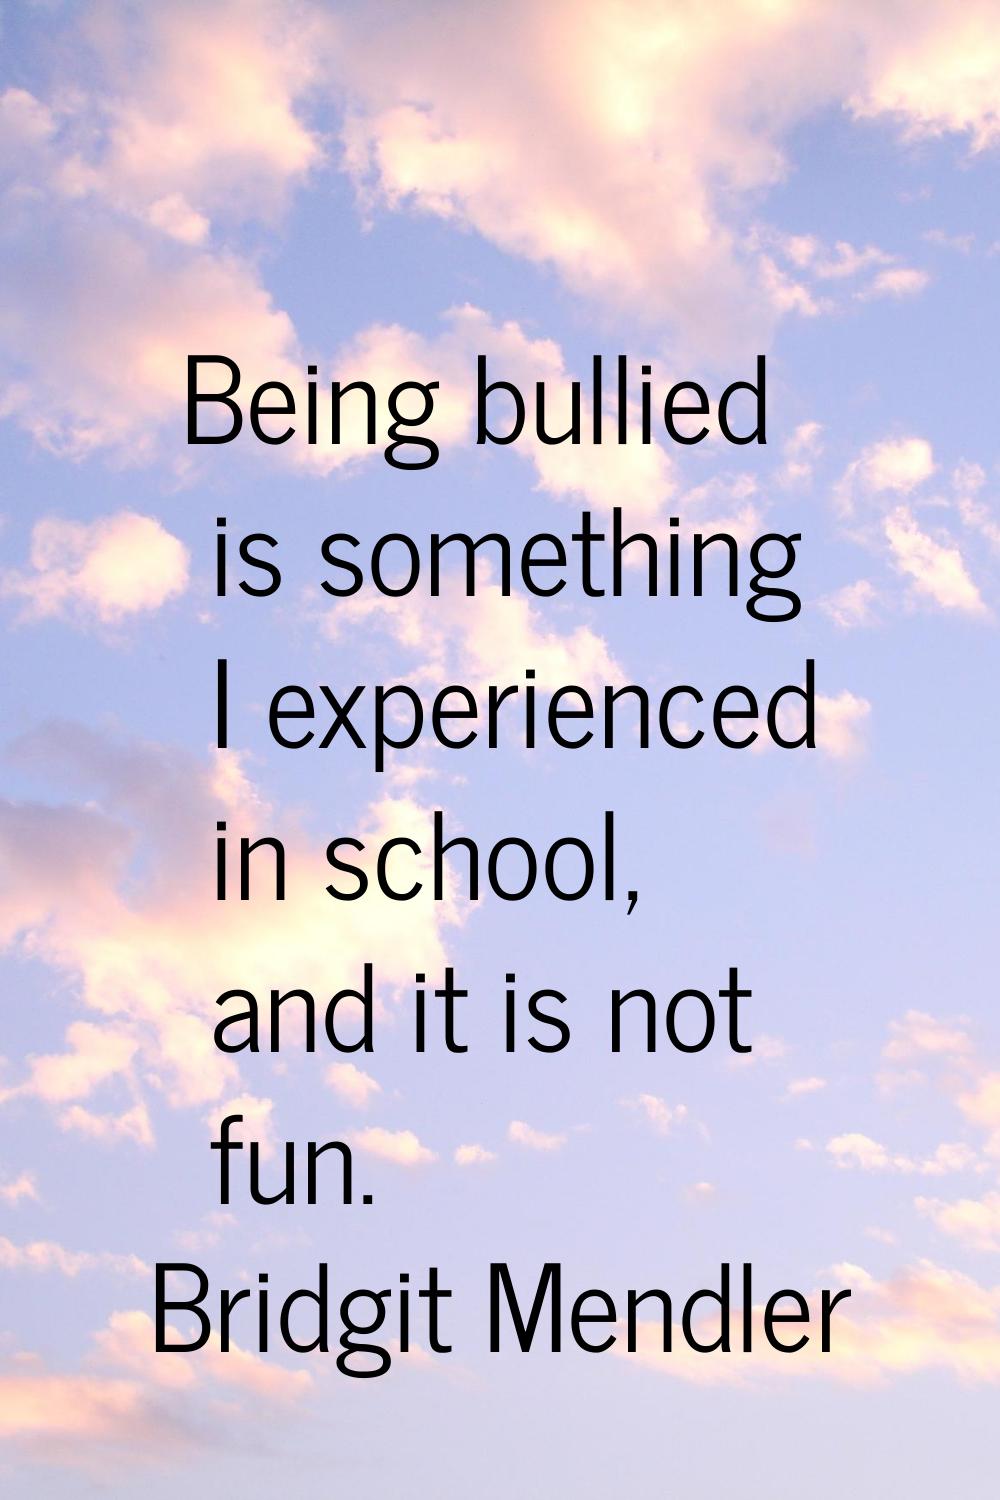 Being bullied is something I experienced in school, and it is not fun.